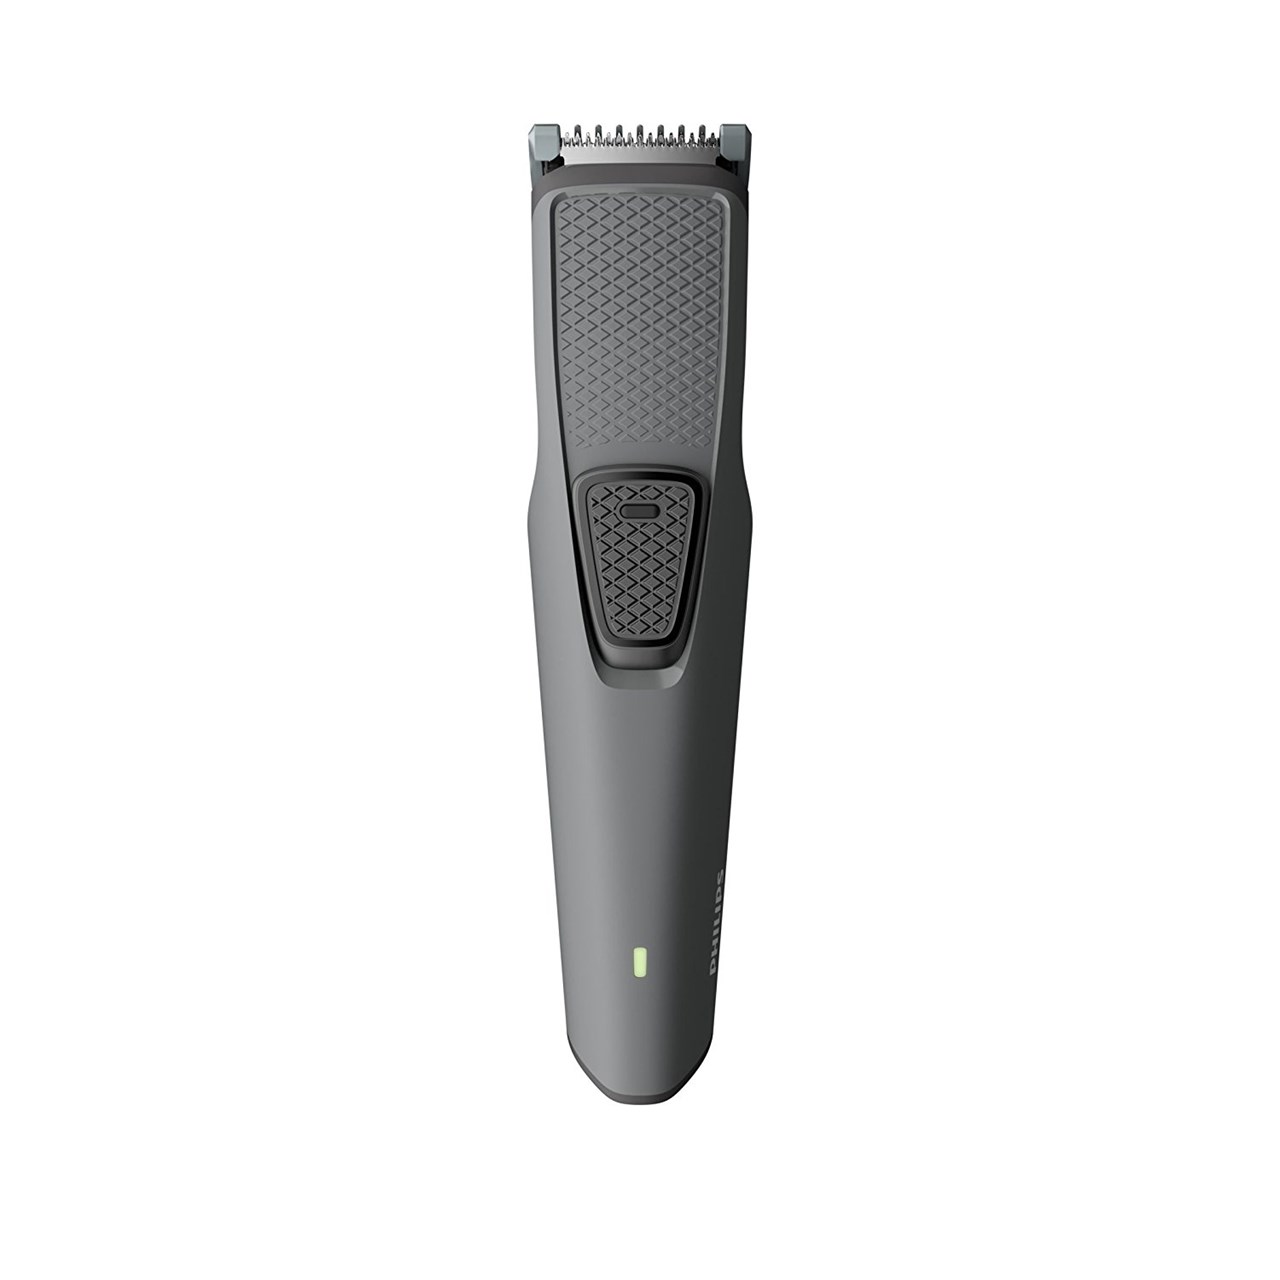 trimmer philips company